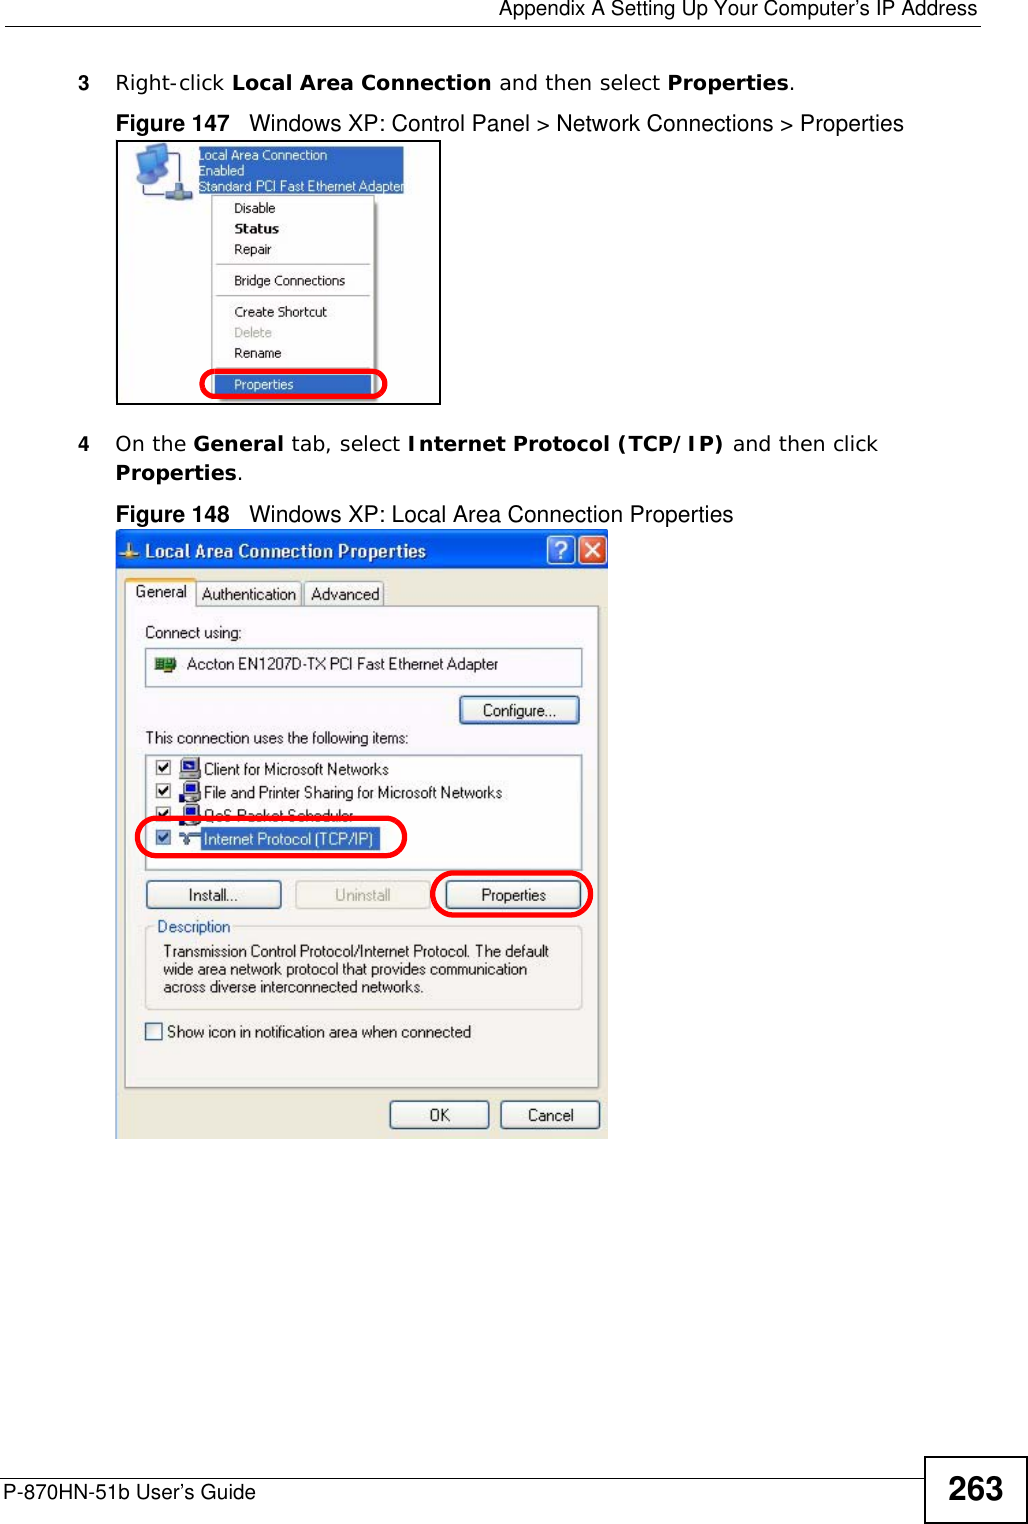  Appendix A Setting Up Your Computer’s IP AddressP-870HN-51b User’s Guide 2633Right-click Local Area Connection and then select Properties.Figure 147   Windows XP: Control Panel &gt; Network Connections &gt; Properties4On the General tab, select Internet Protocol (TCP/IP) and then click Properties.Figure 148   Windows XP: Local Area Connection Properties